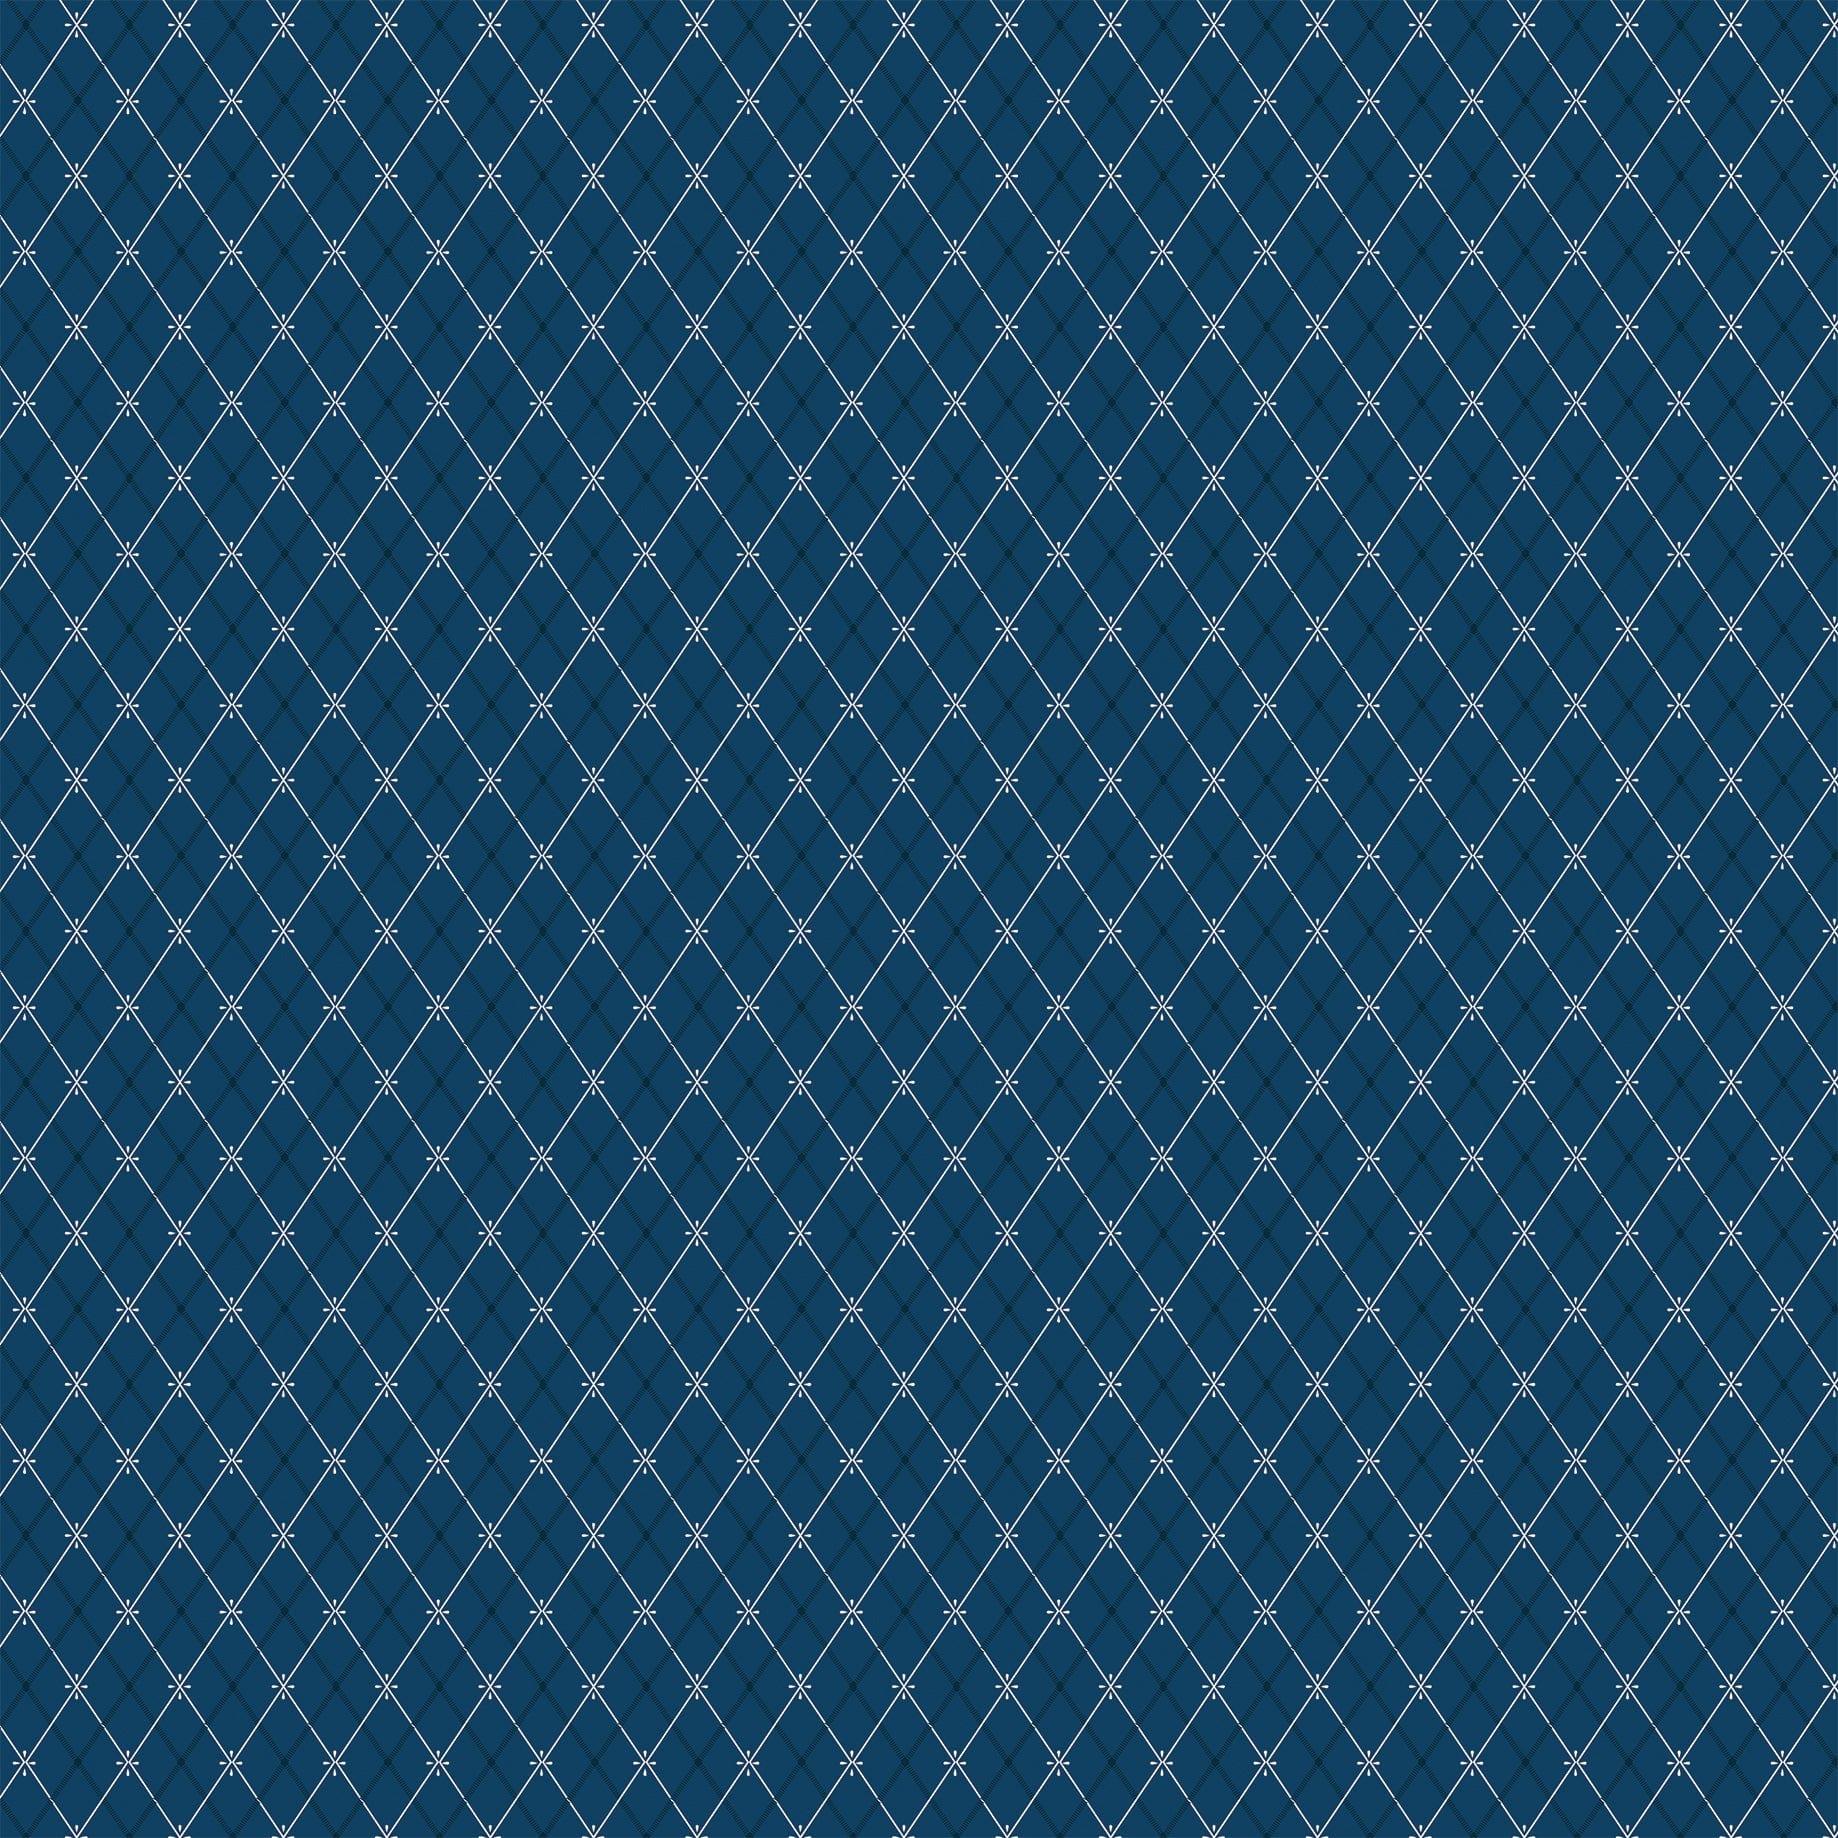 Wizards & Company Collection Tricky Trunks 12 x 12 Double-Sided Scrapbook Paper by Echo Park Paper - Scrapbook Supply Companies